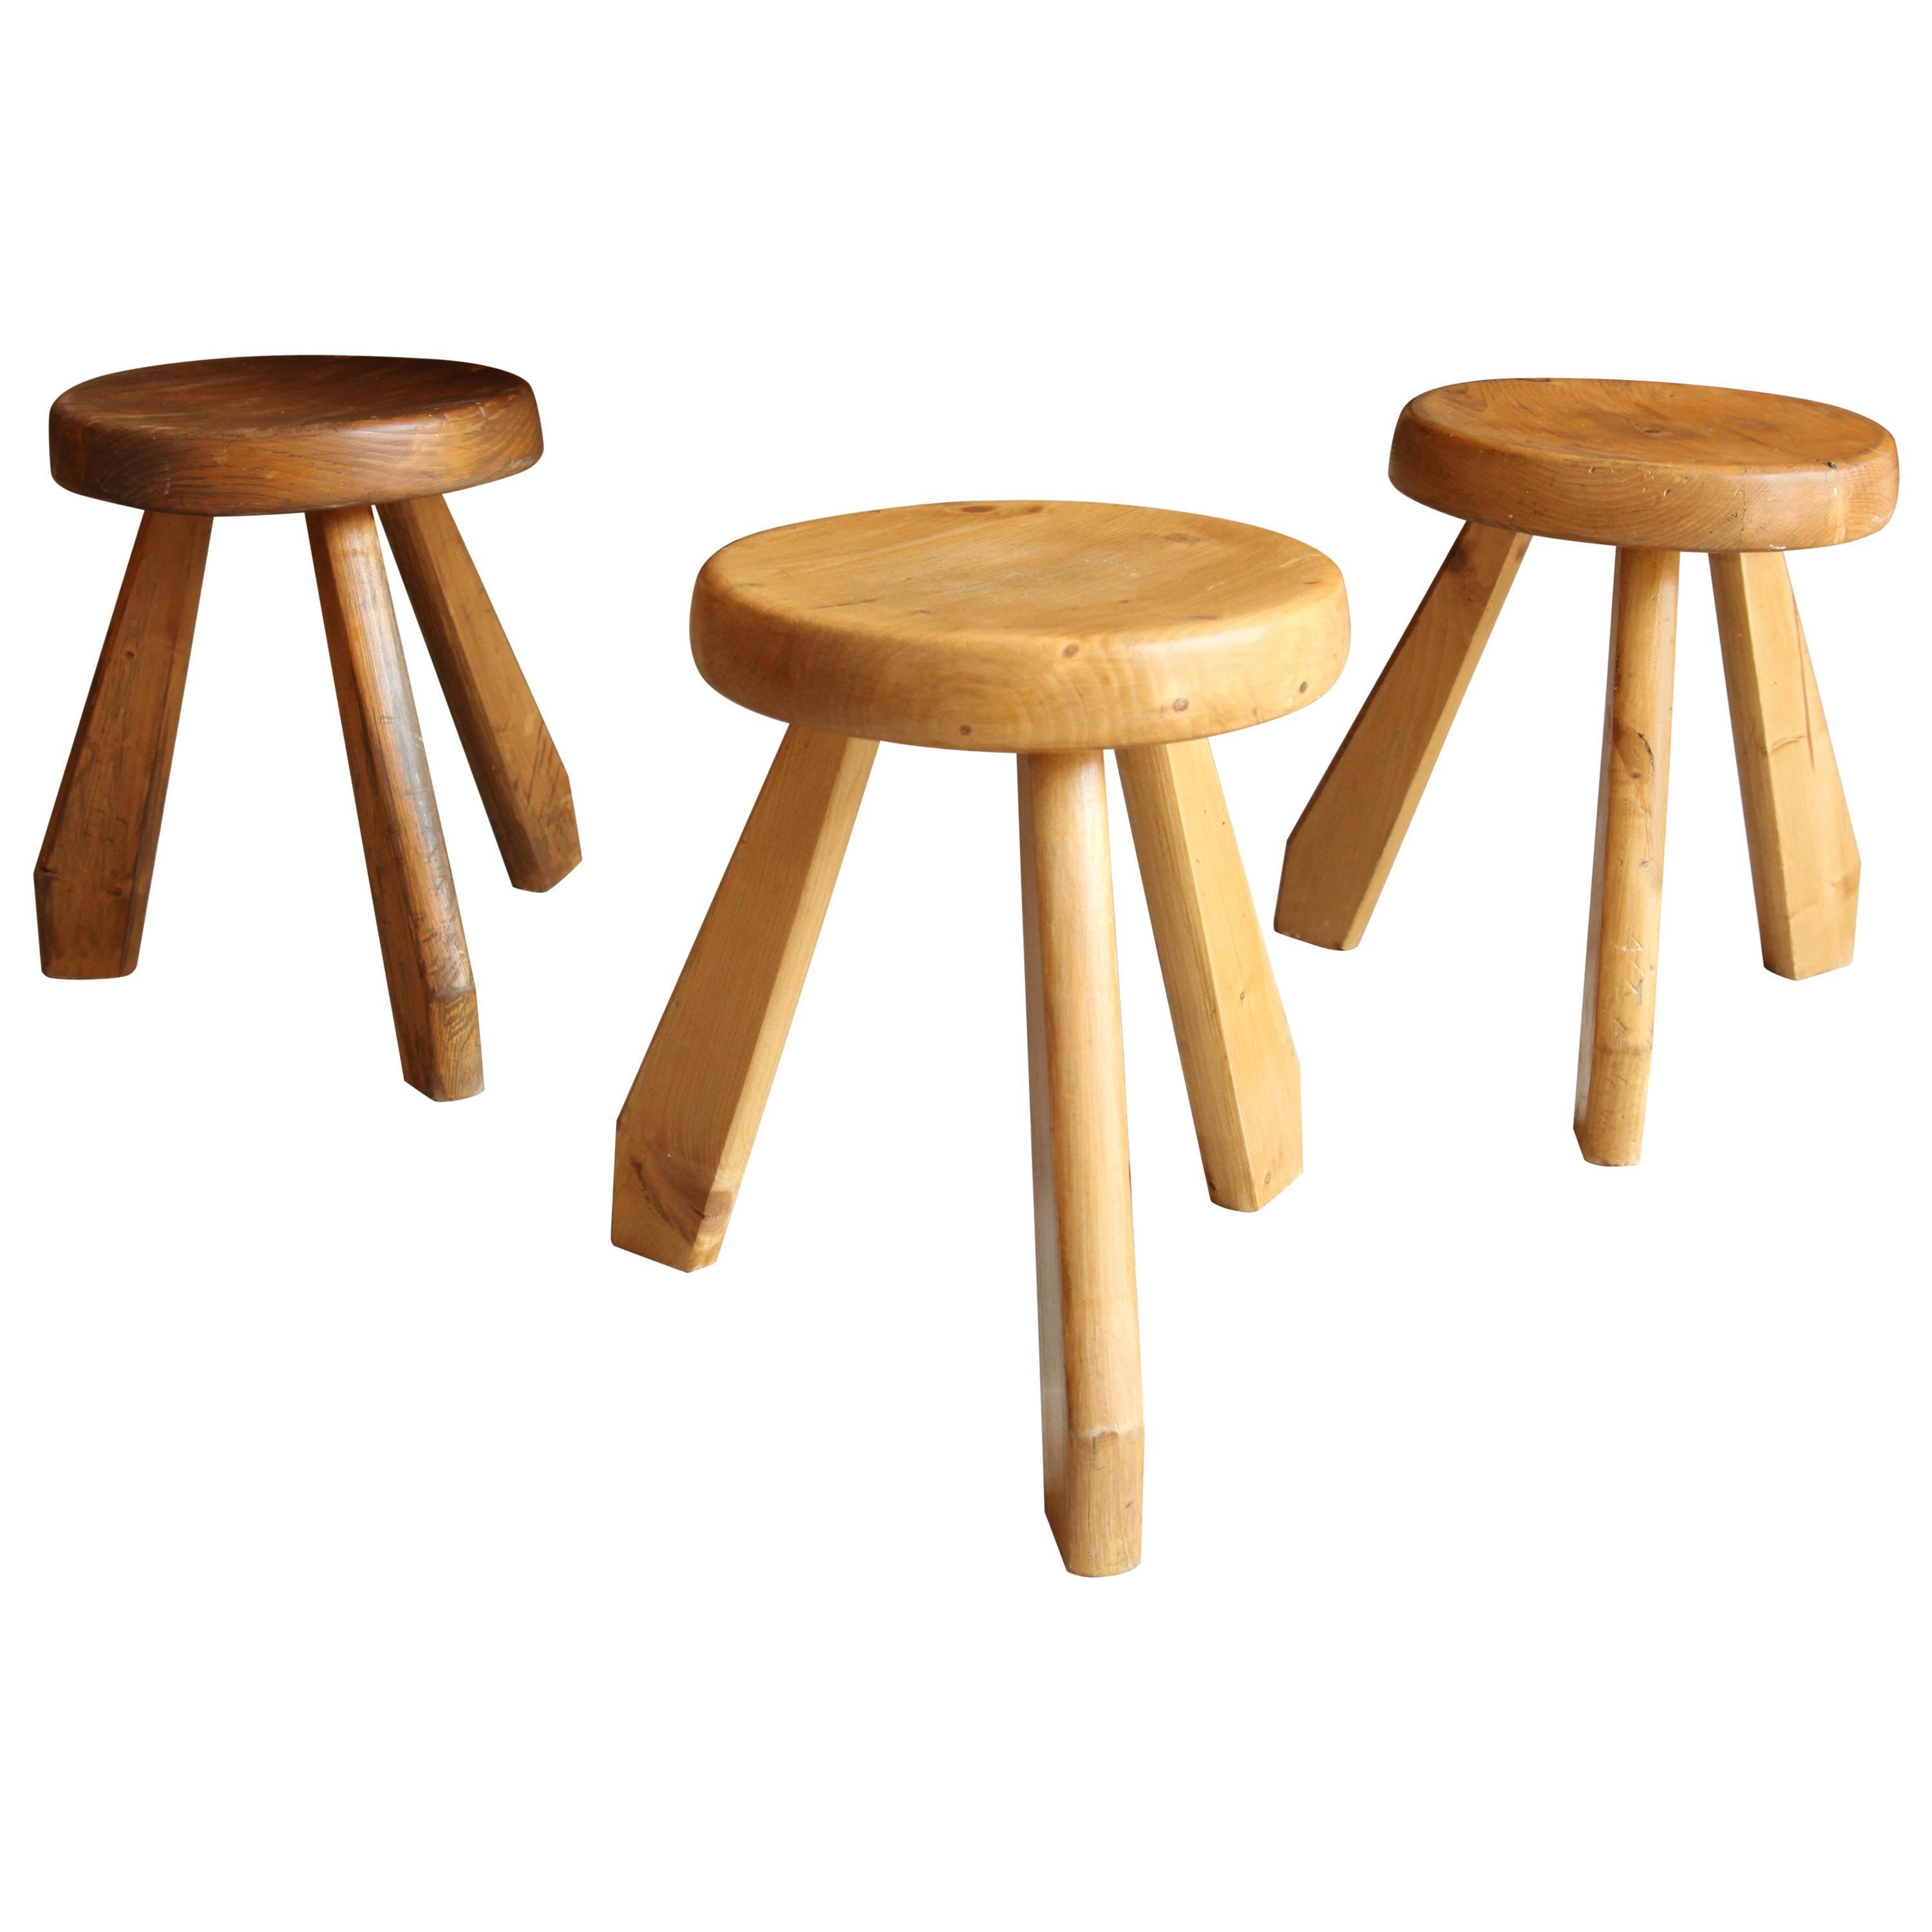 Charlotte Perriand, Stools from Les Arcs, Savoie, circa 1968